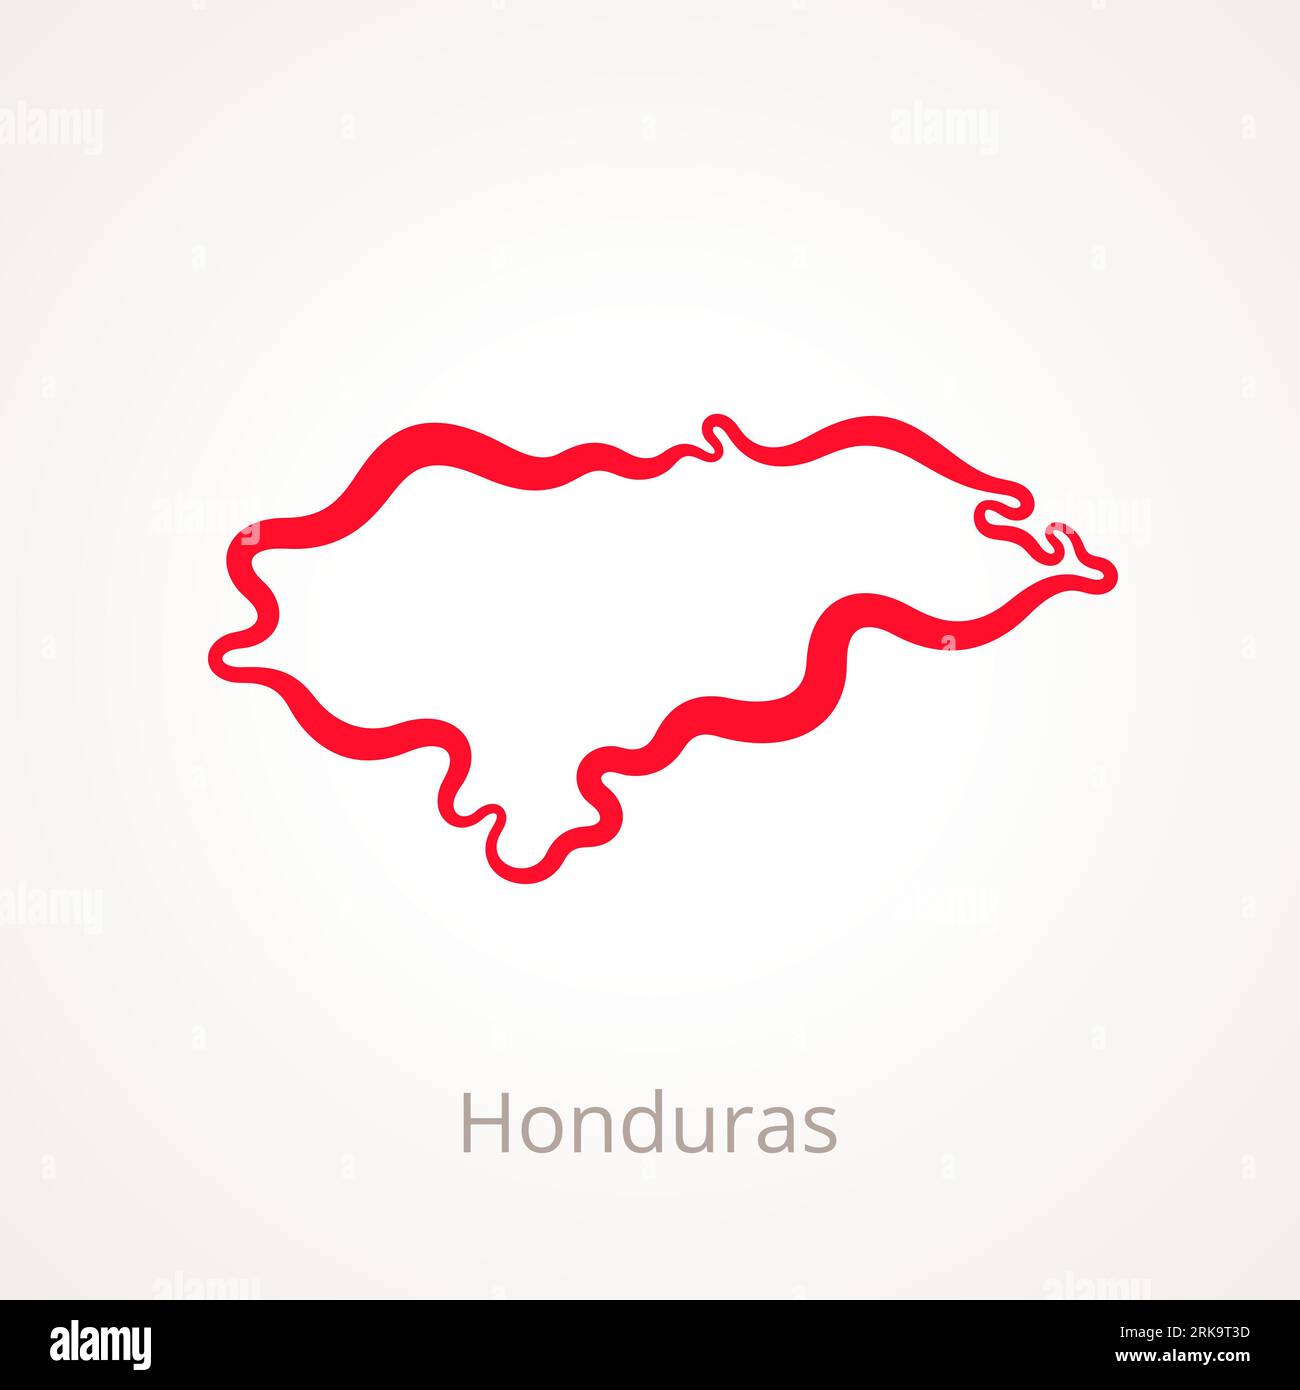 Outline map of Honduras marked with red line. Stock Vector